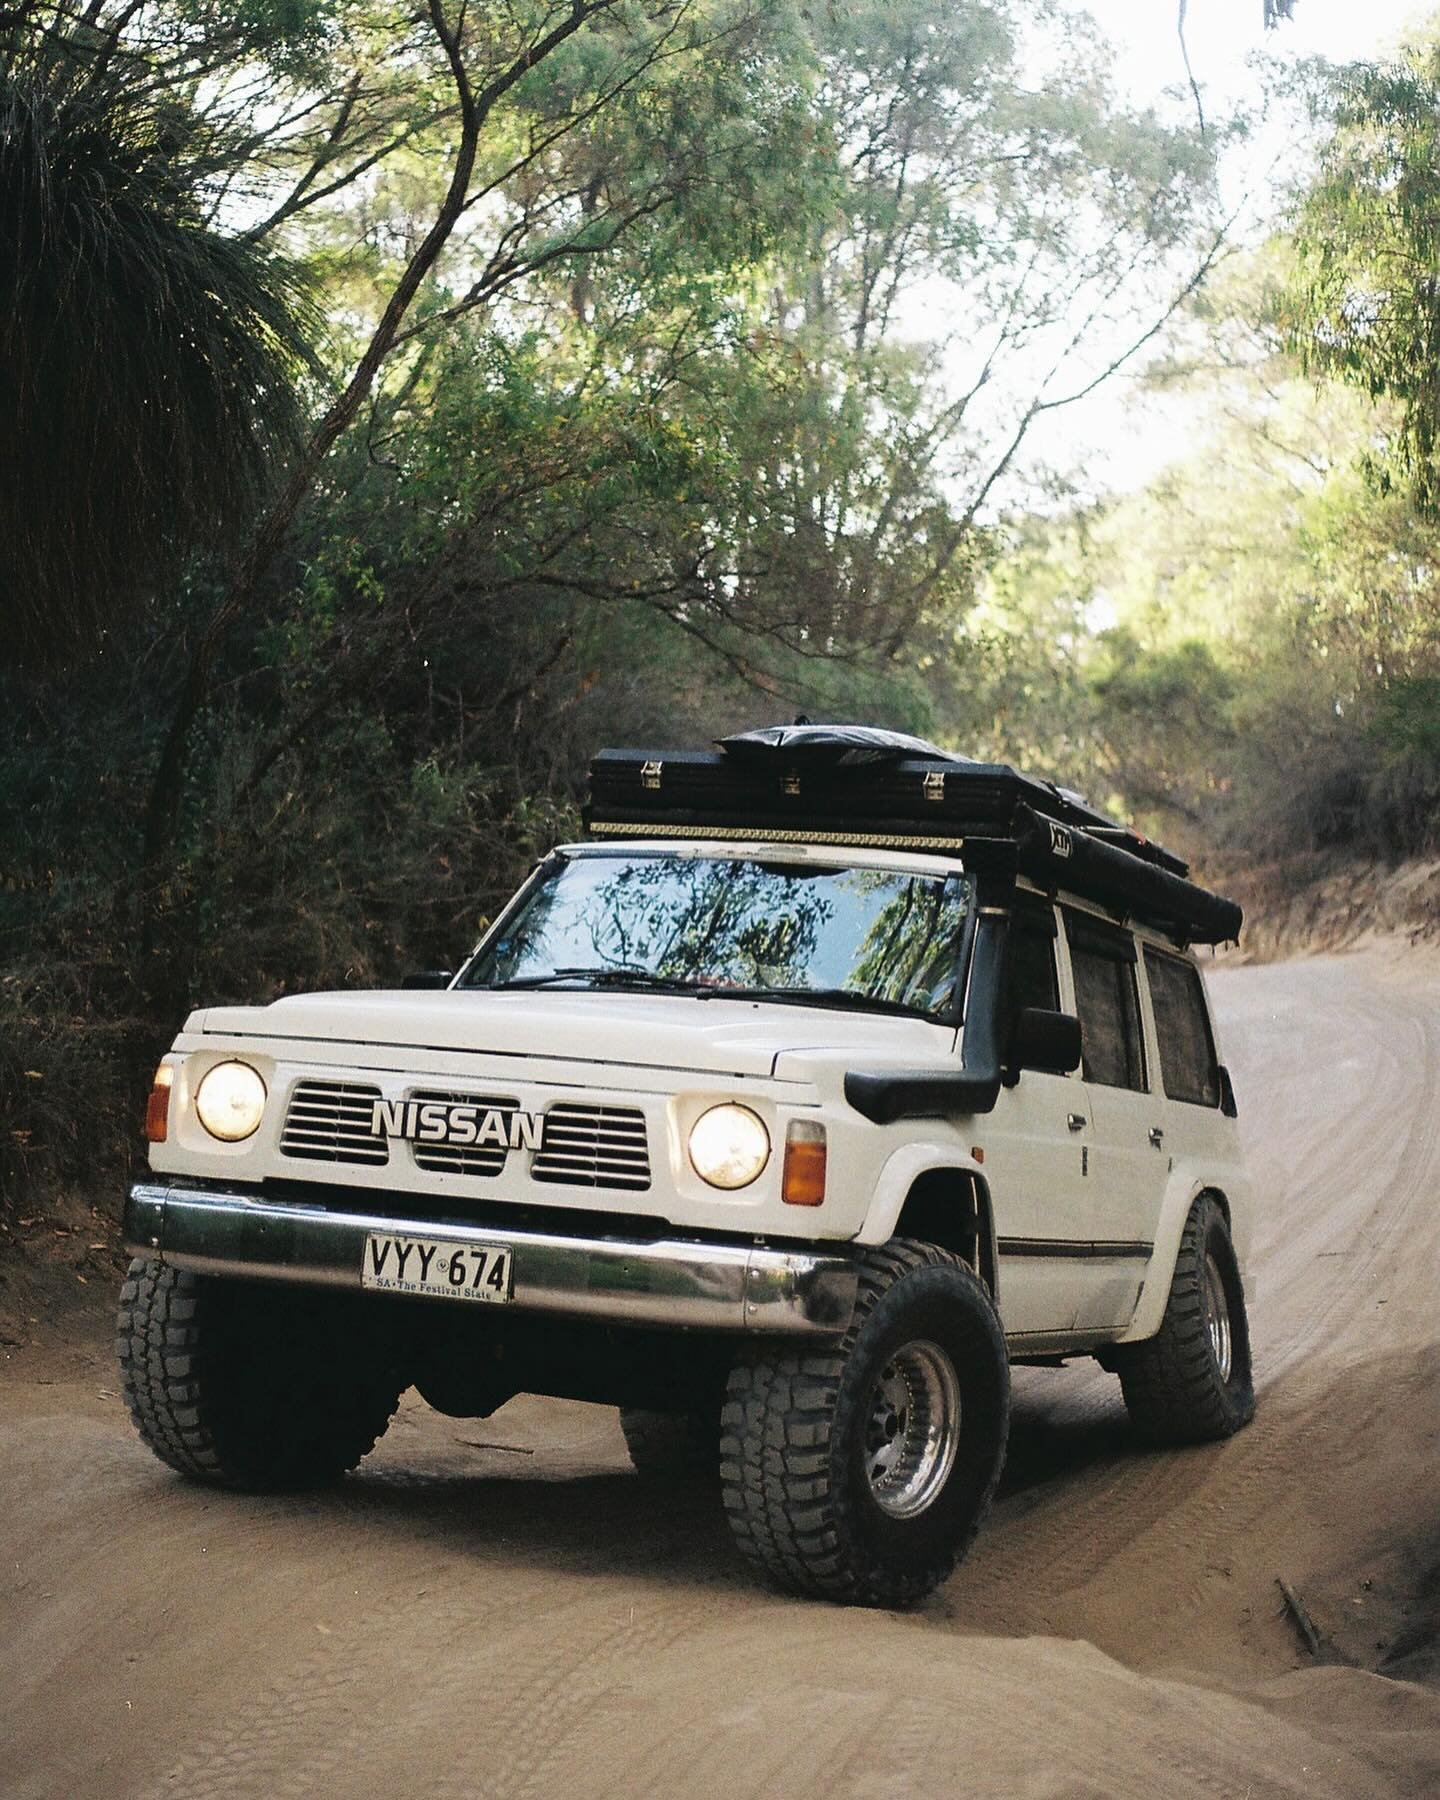 Patrol on film! Sundays with James Knights &lsquo;94 Nissan Patrol. Brew that coffee and get yourself over to the website to read more! 

#nissan #patrol #patrollife #gq #nissanpatrol #classic #classiccars #4x4 #4wd #overland #touring #australia